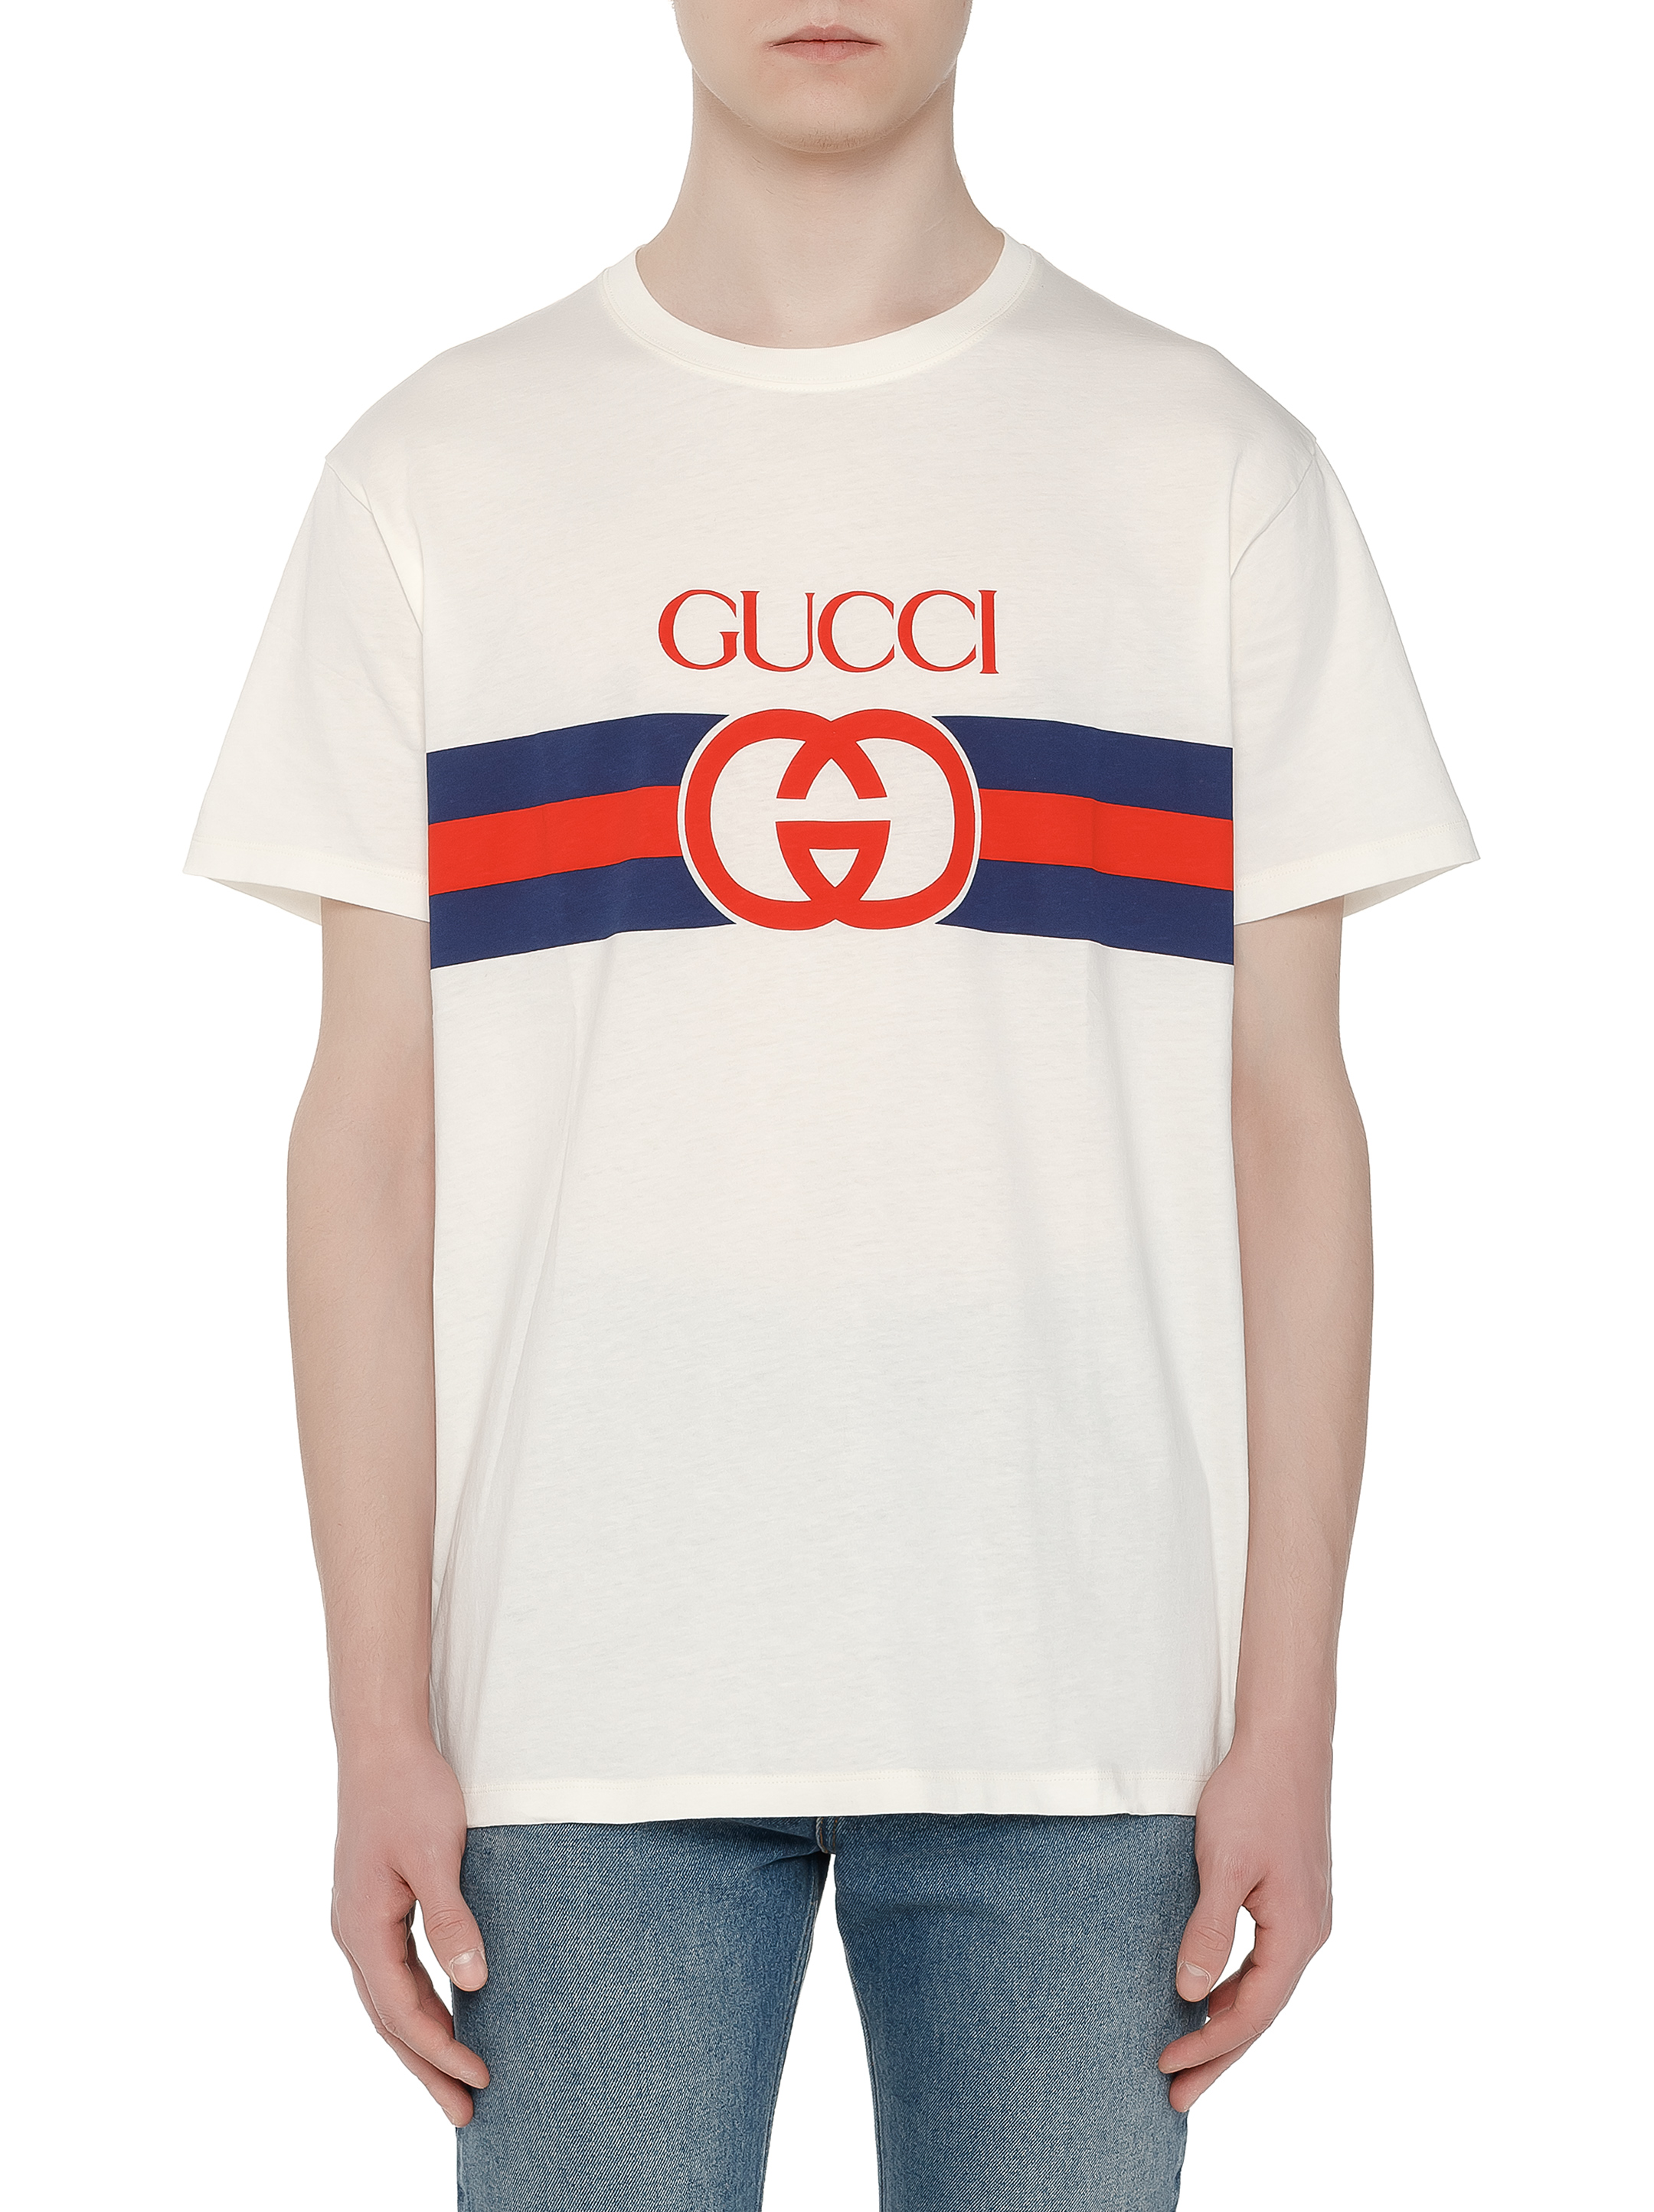 beskydning falskhed Bot Gucci men's Logo cotton t-shirt - buy for 246400 KZT in the official Viled  online store, art. 548334 XJET1.9095_XL_231